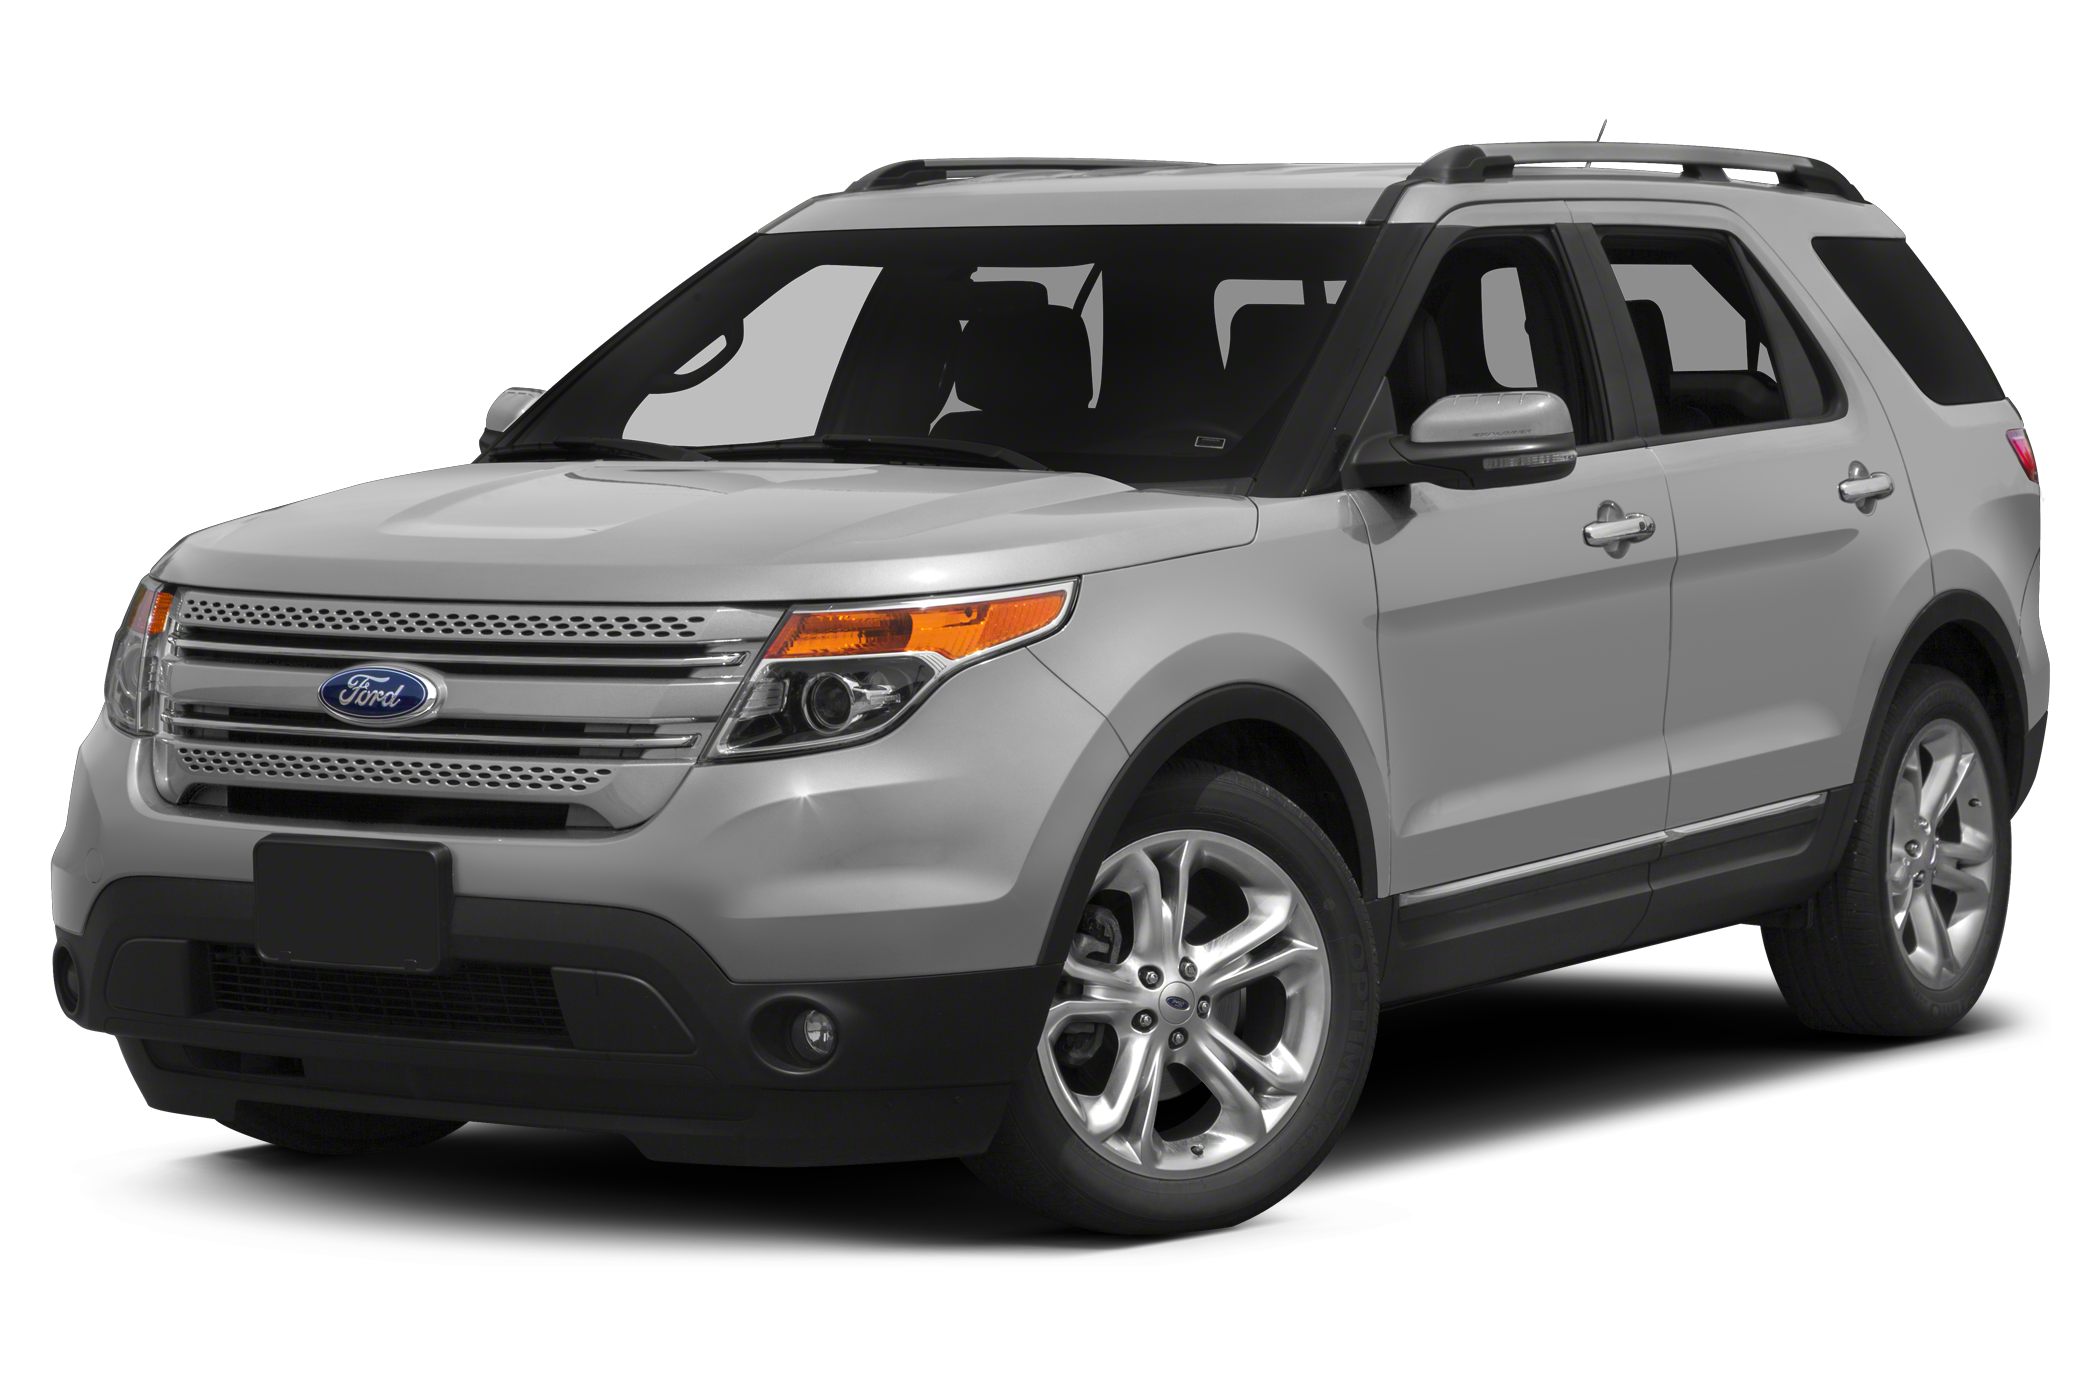 Great Deals on a new 2015 Ford Explorer Limited 4dr 4x4 at The Autoblog